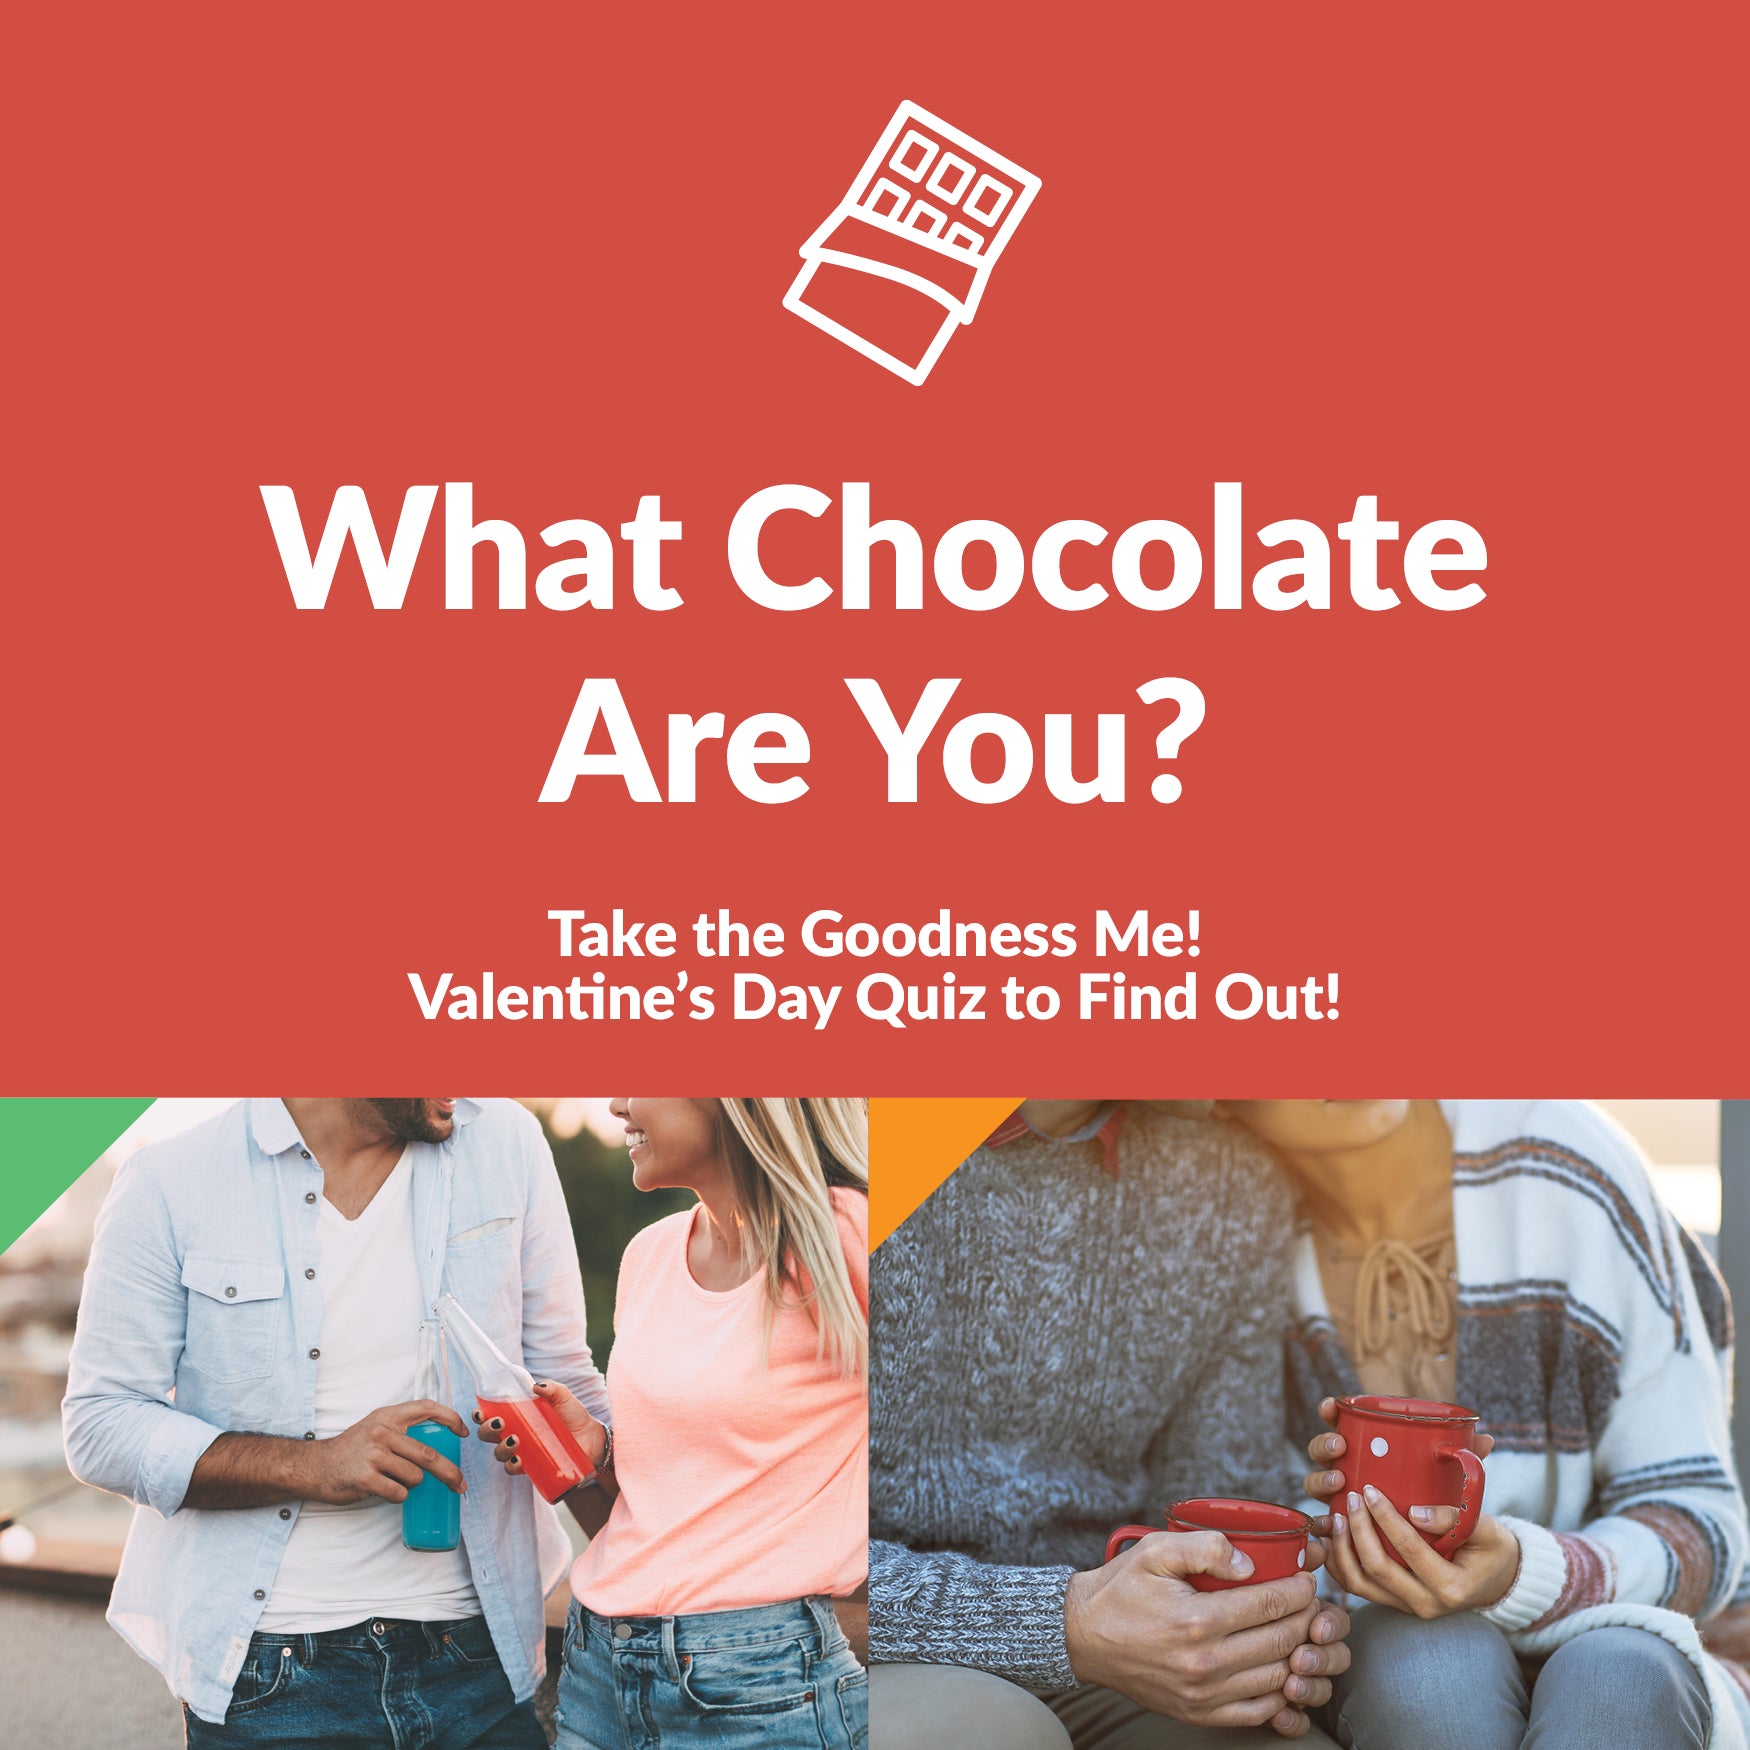 What Chocolate Flavour Are You?